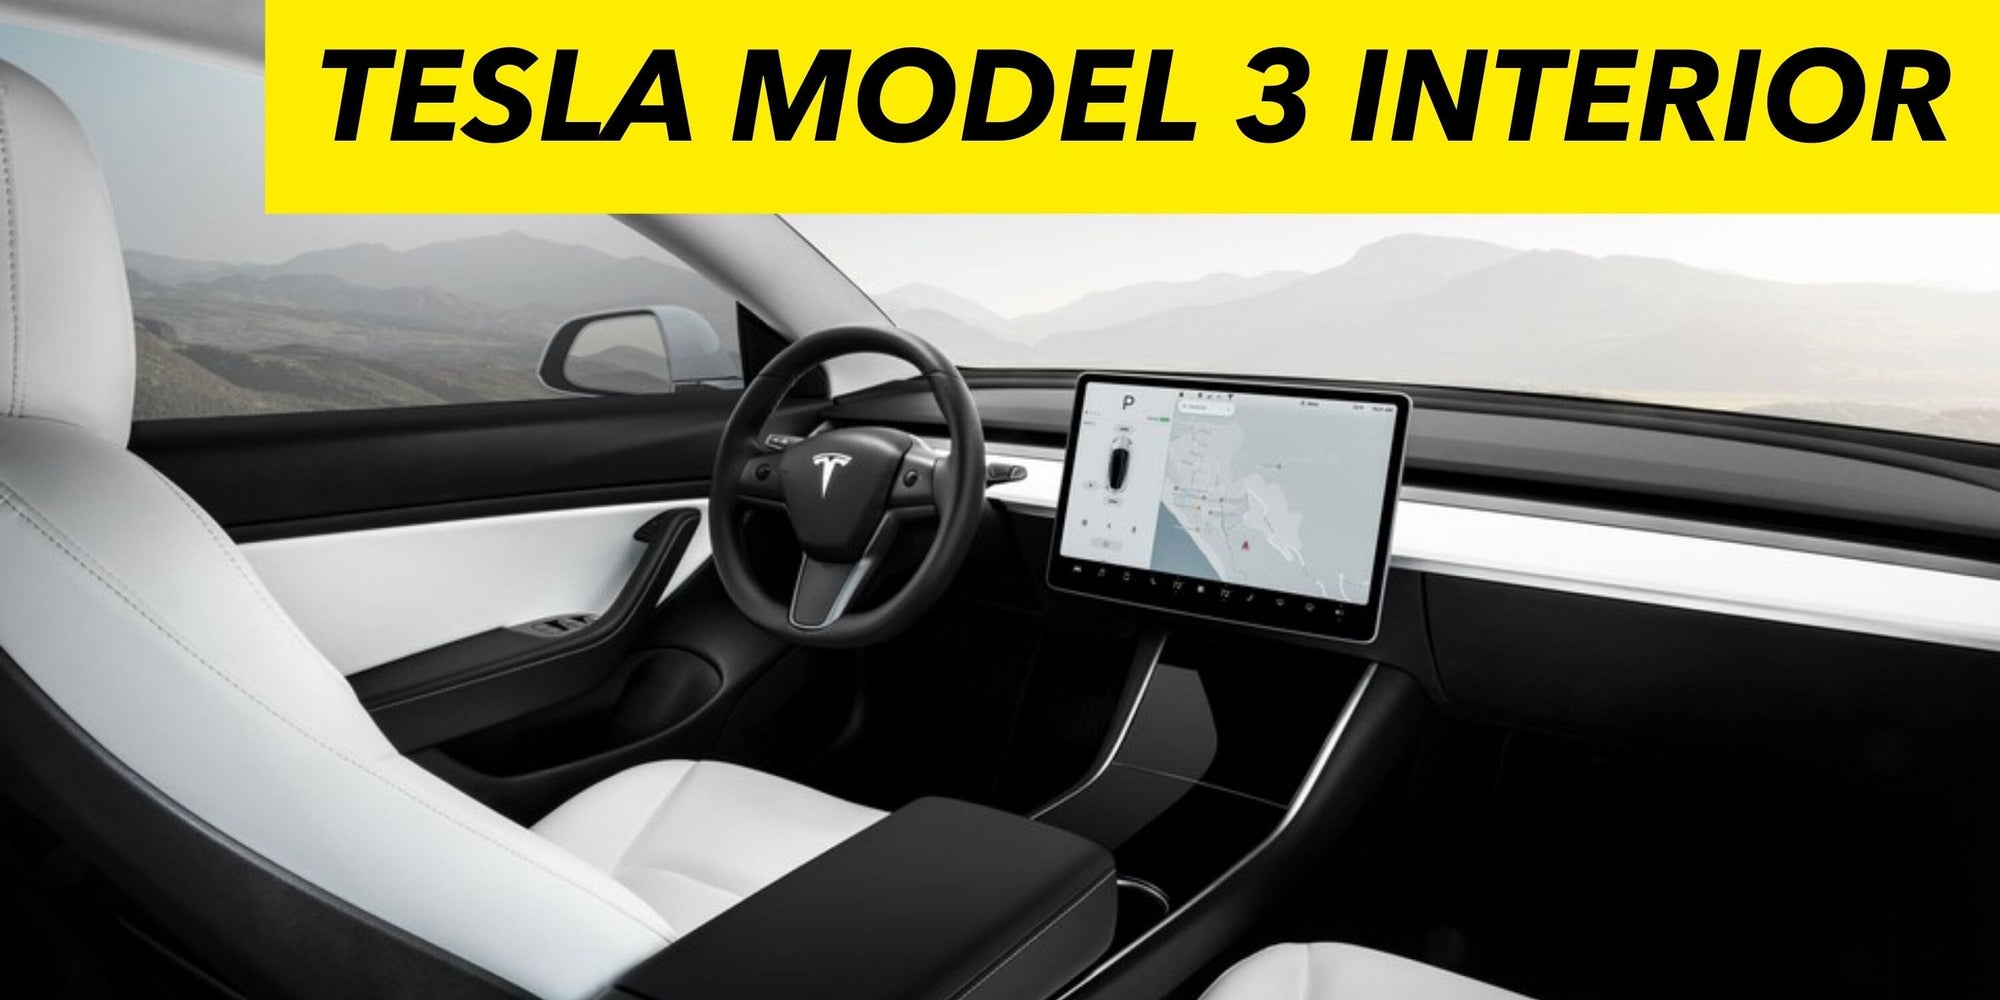 Tesla Model 3 Interior: What it's like on the inside